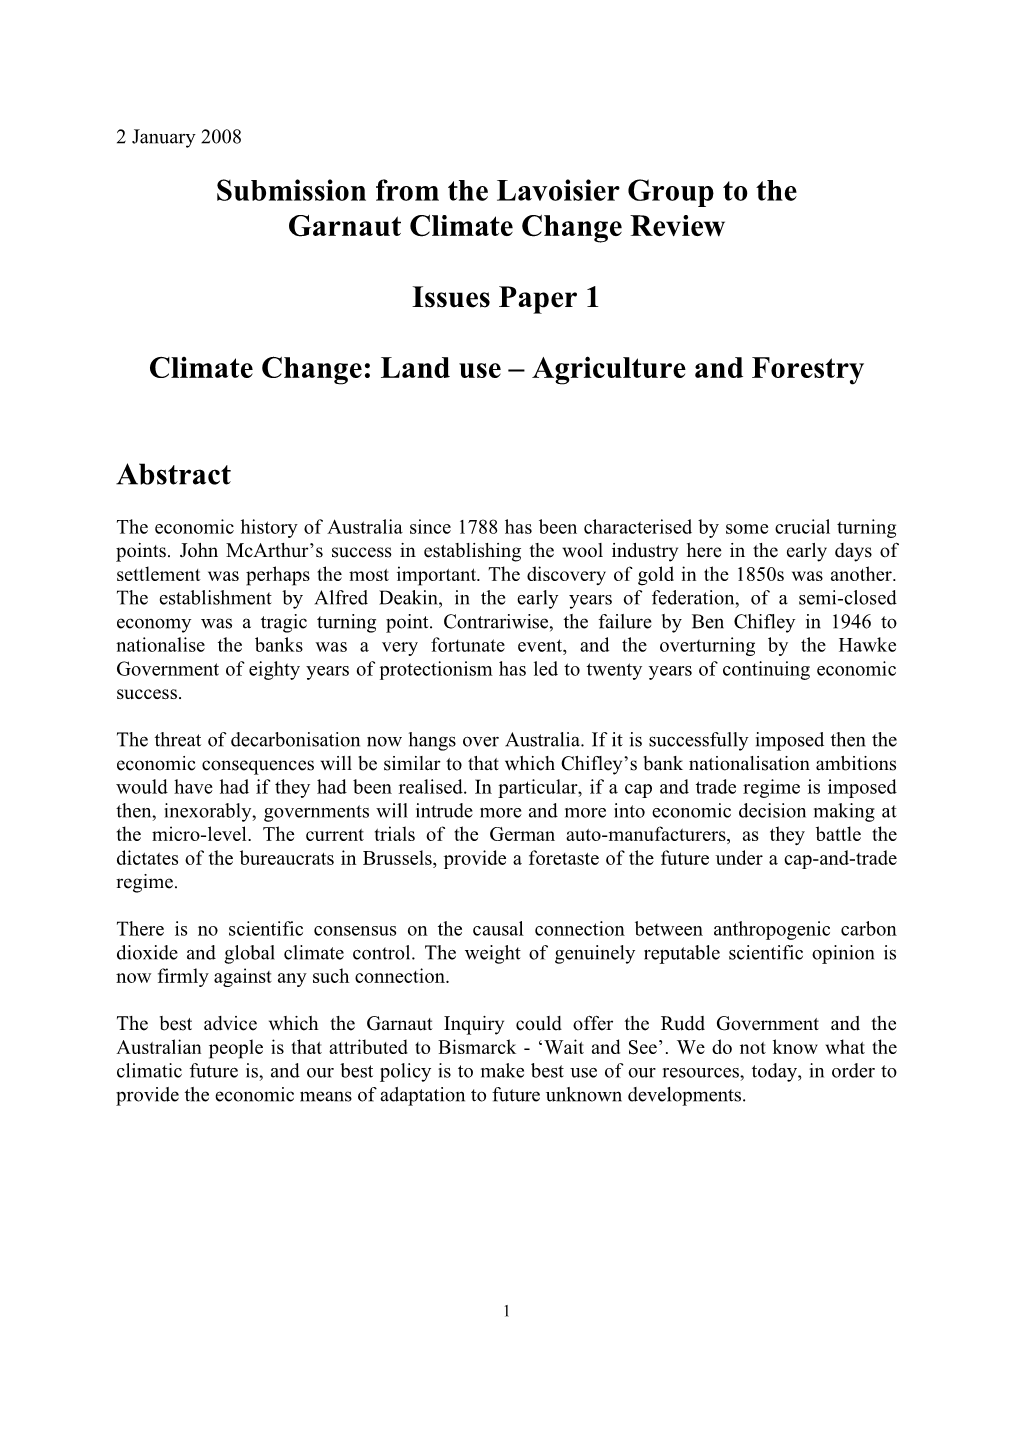 Submission to the Garnaut Climate Change Review